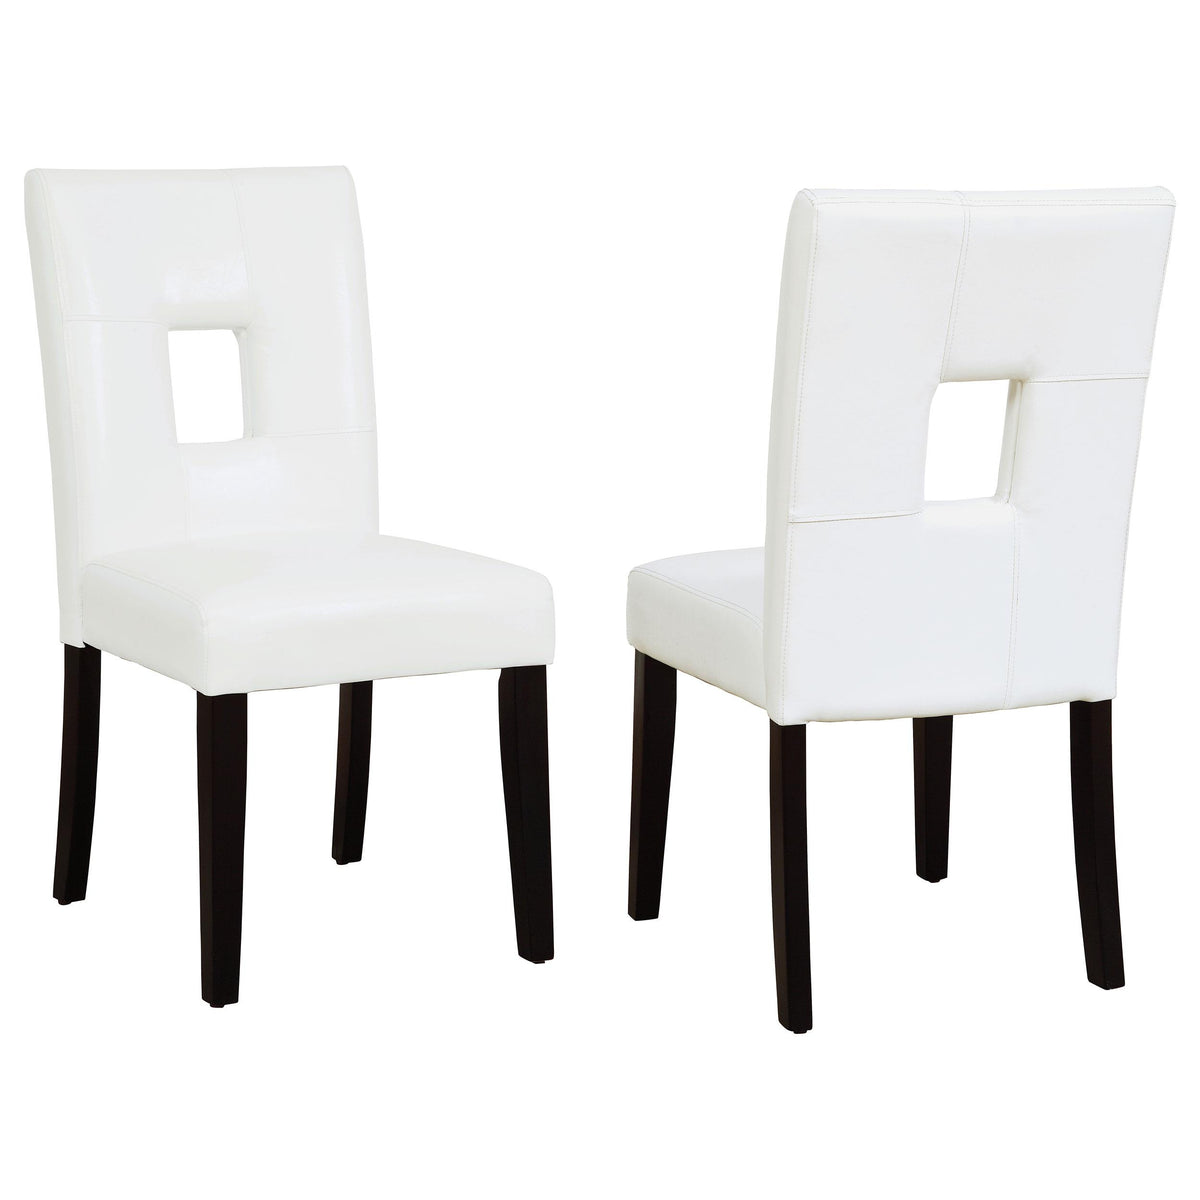 Shannon Open Back Upholstered Dining Chairs White (Set of 2) Shannon Open Back Upholstered Dining Chairs White (Set of 2) Half Price Furniture